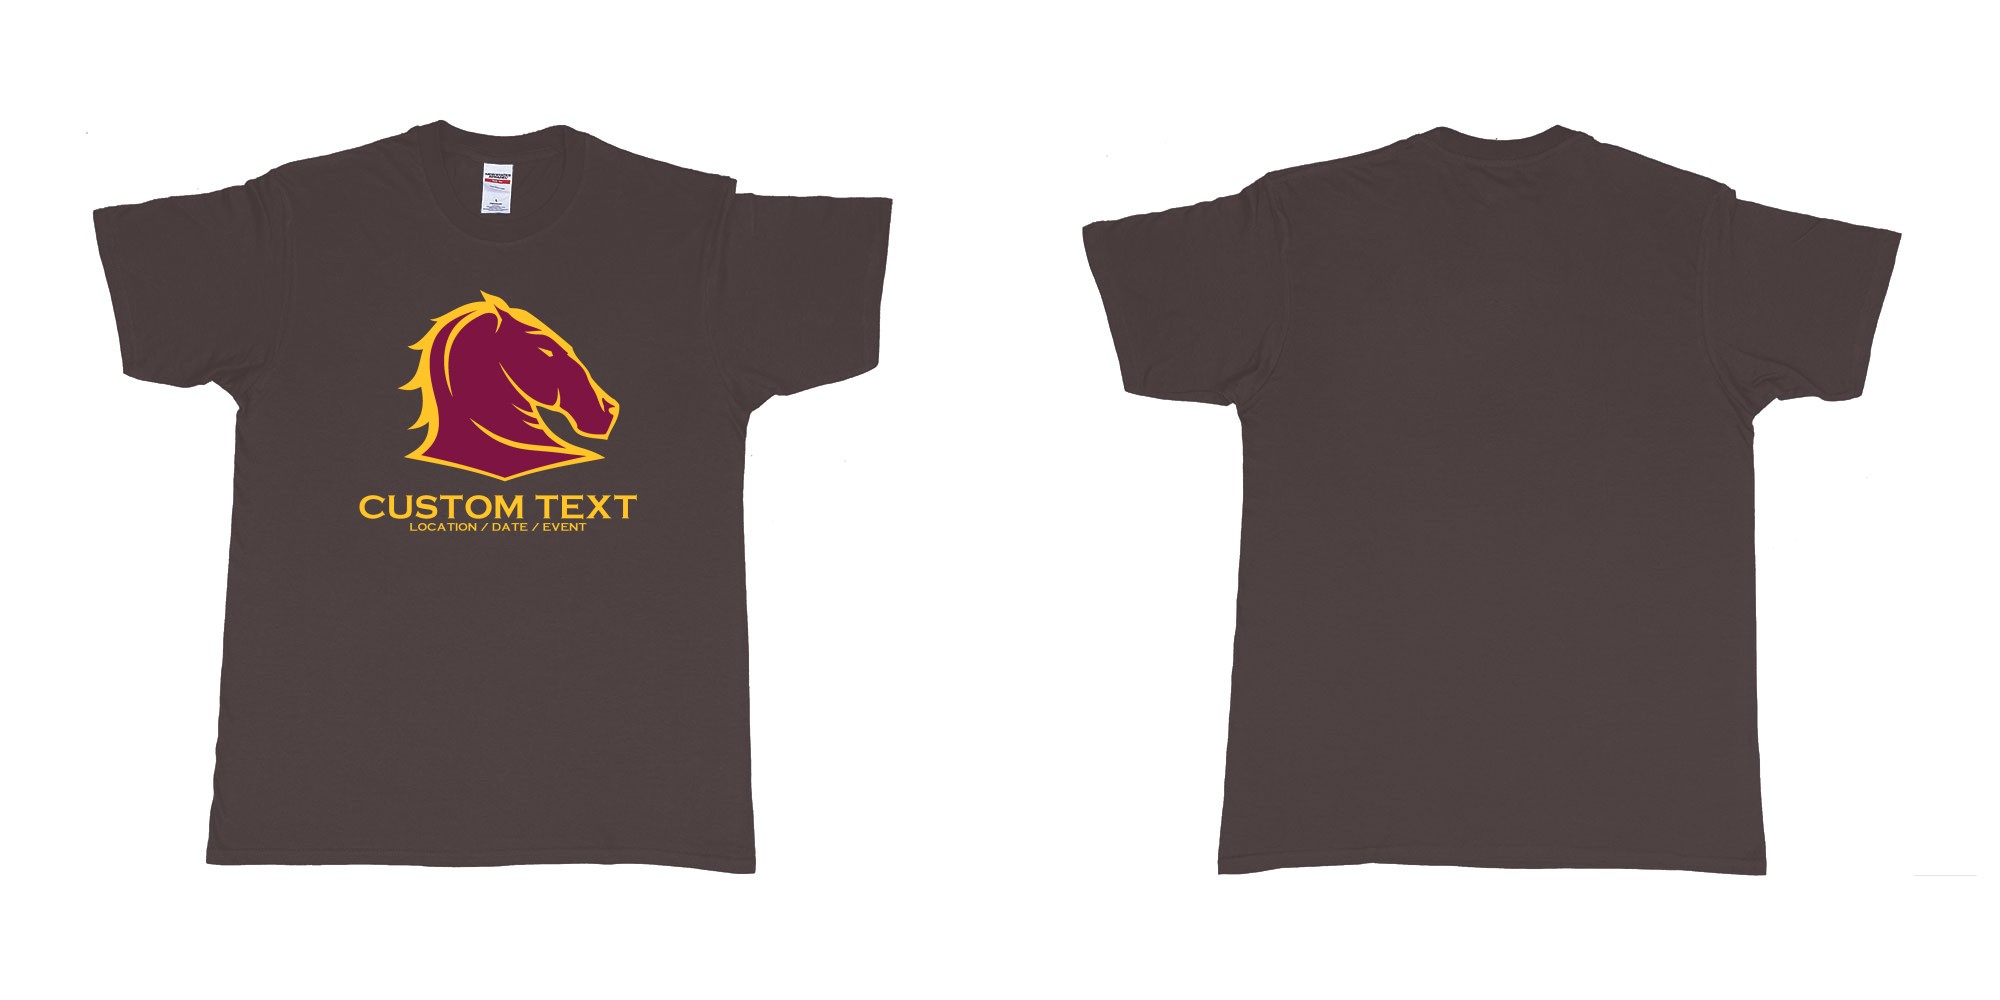 Custom tshirt design brisbane broncos australian professional rugby league football club queensland in fabric color dark-chocolate choice your own text made in Bali by The Pirate Way